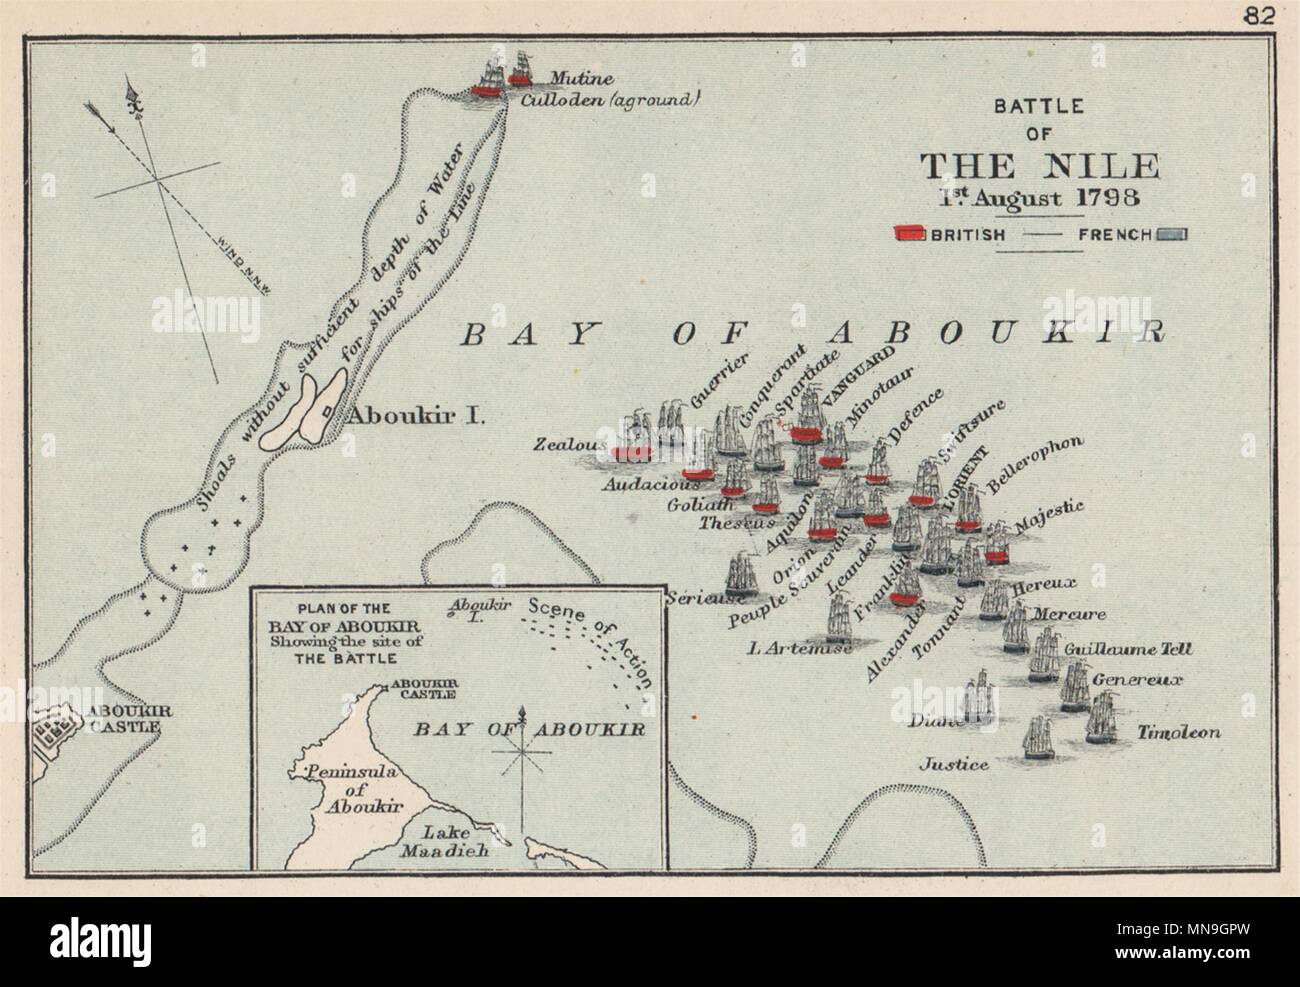 BATTLE OF THE NILE 1798. Aboukir Bay.French Revolutionary Wars. SMALL 1907 map Stock Photo